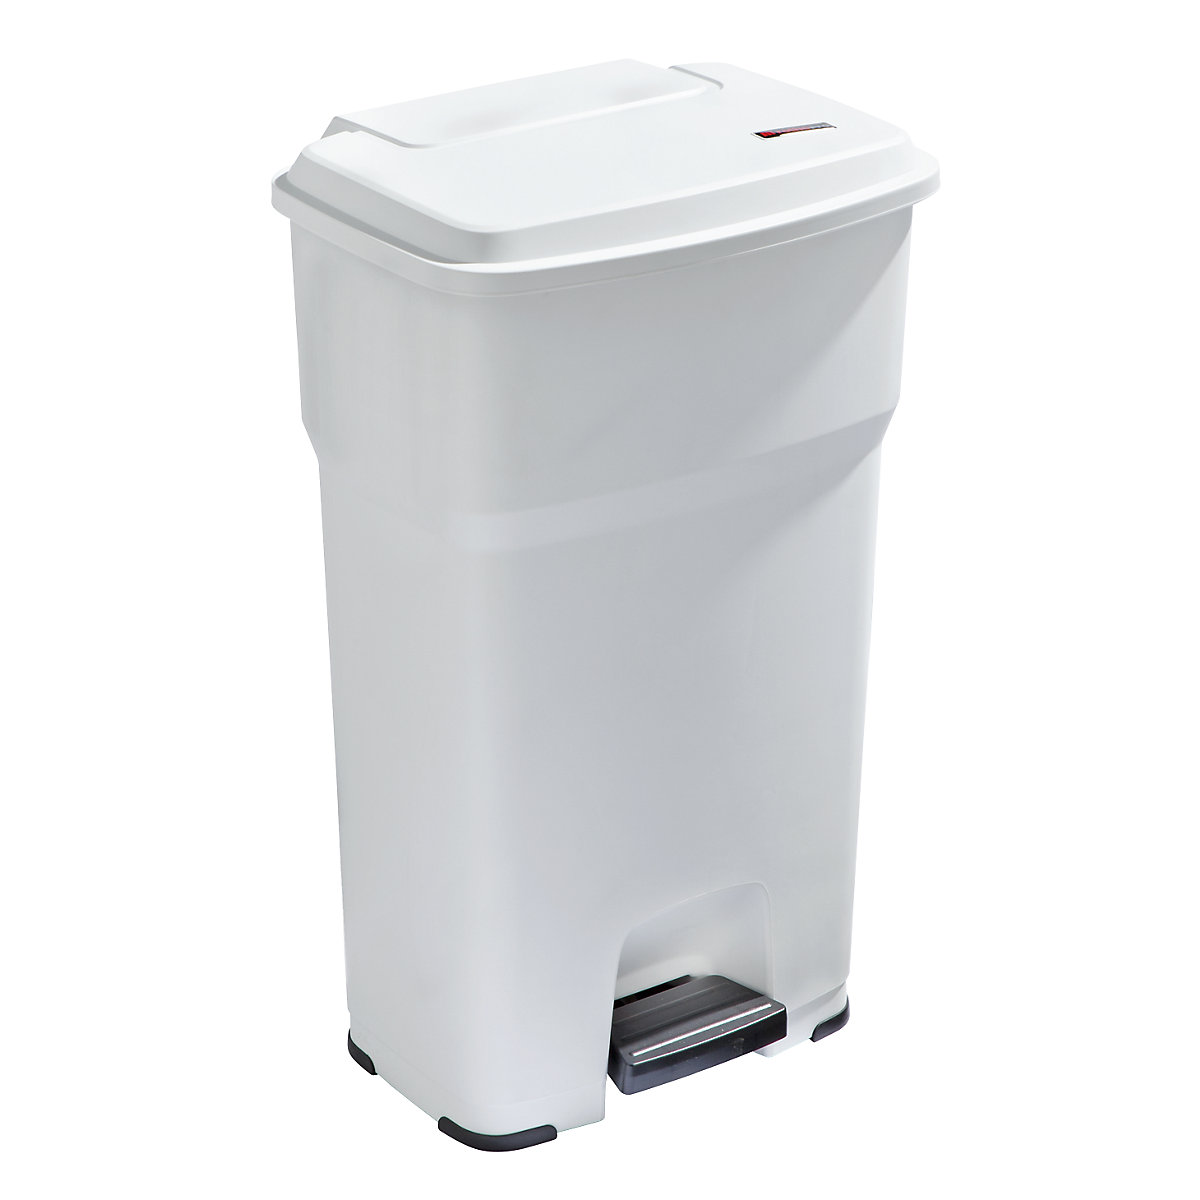 rothopro – HERA waste collector with pedal, capacity 85 l, WxHxD 490 x 790 x 390 mm, white